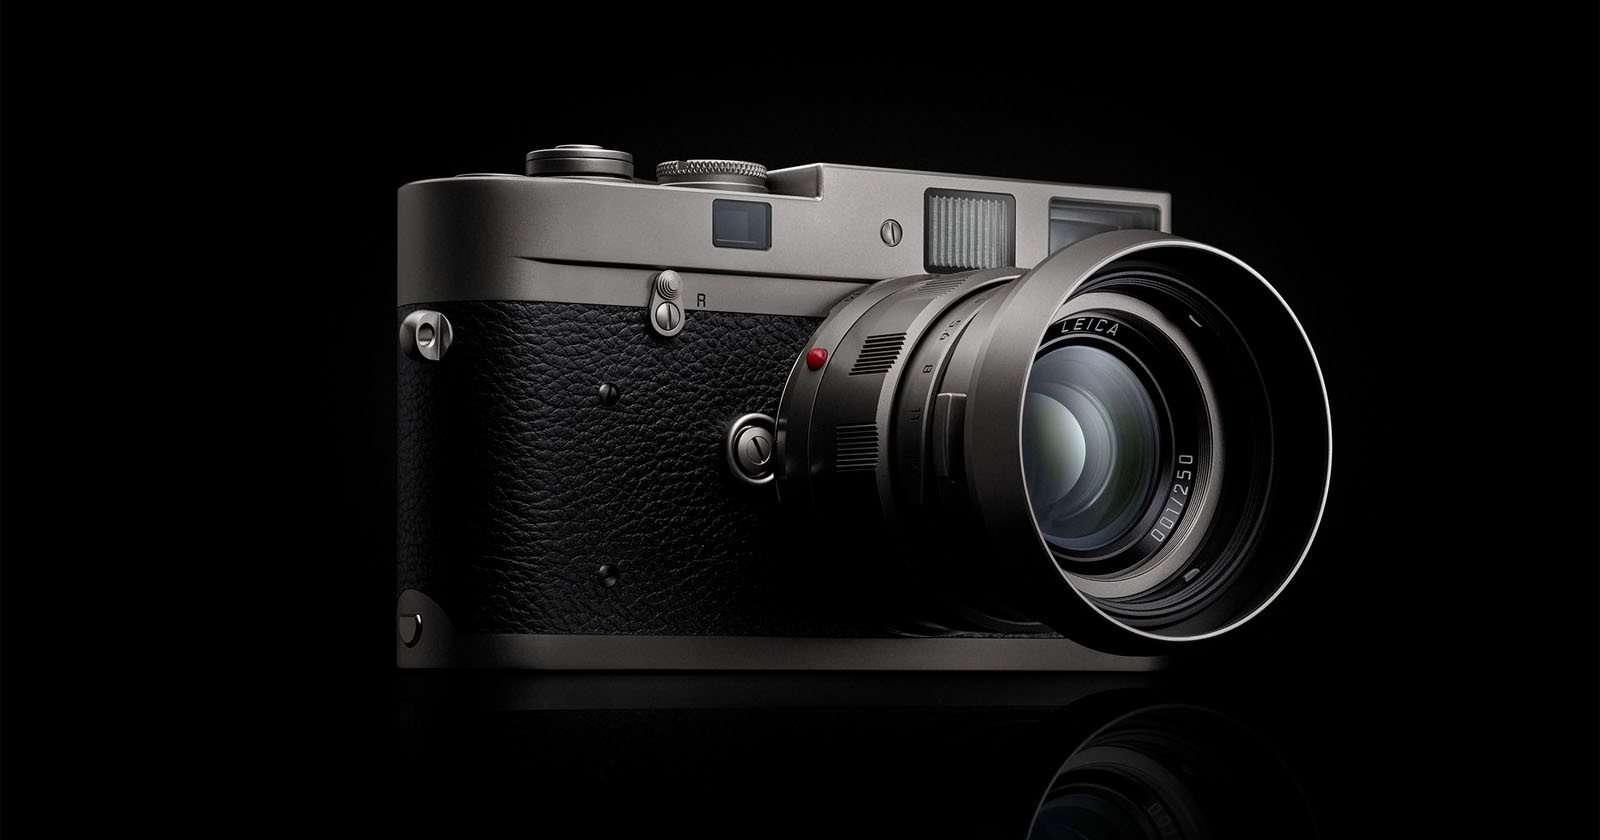 Limited Edition Leica M-A ‘Titan’ is a New $20,000 Manual Film Camera